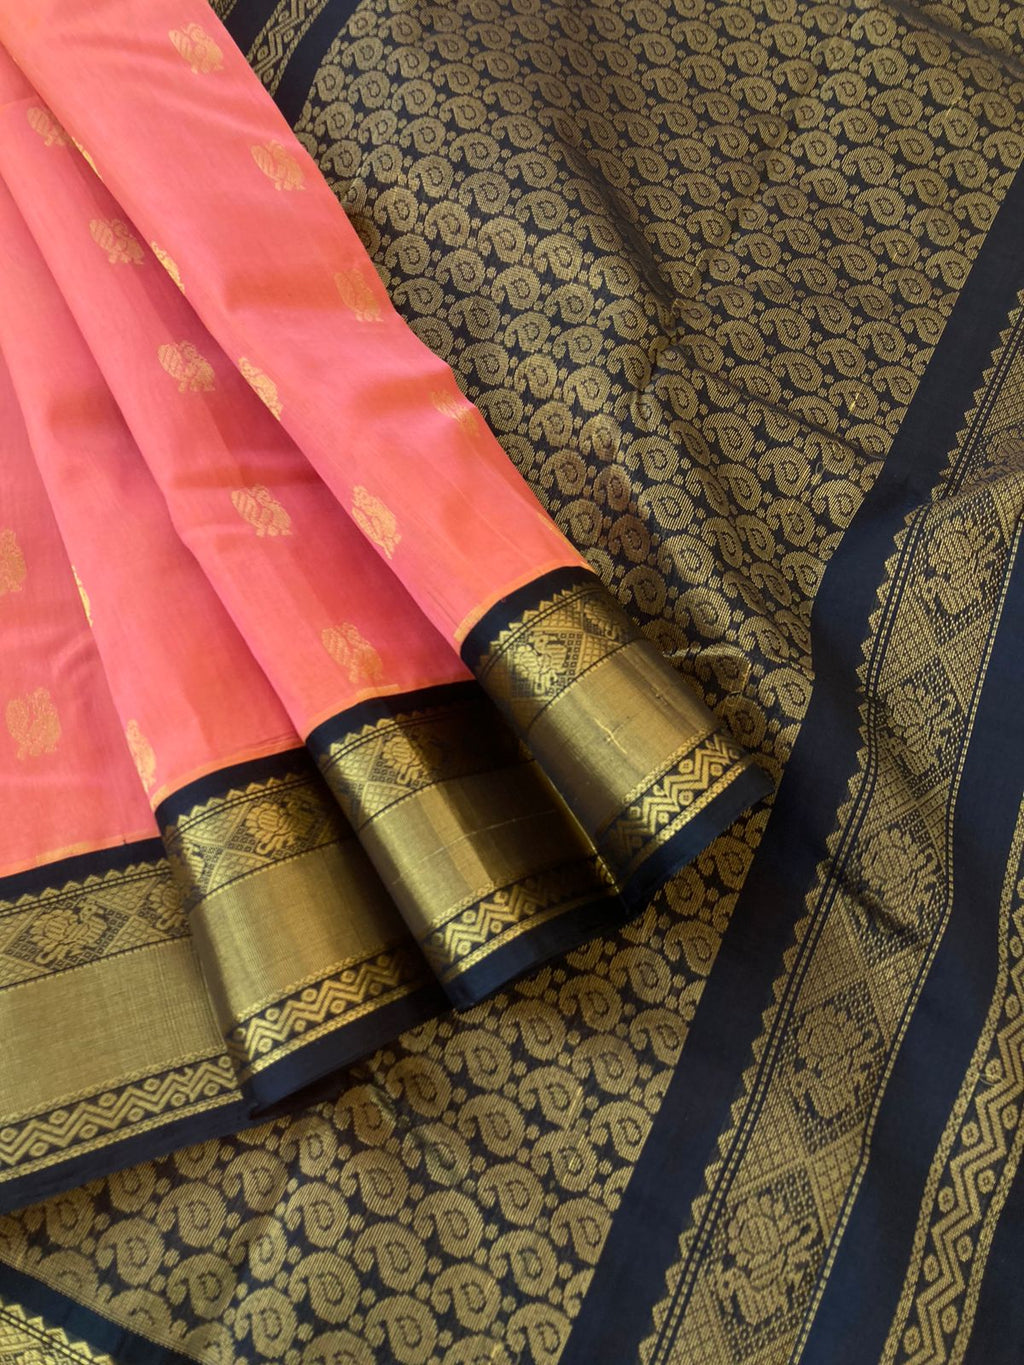 Korvai Silk Cottons - peach pink and black coffee